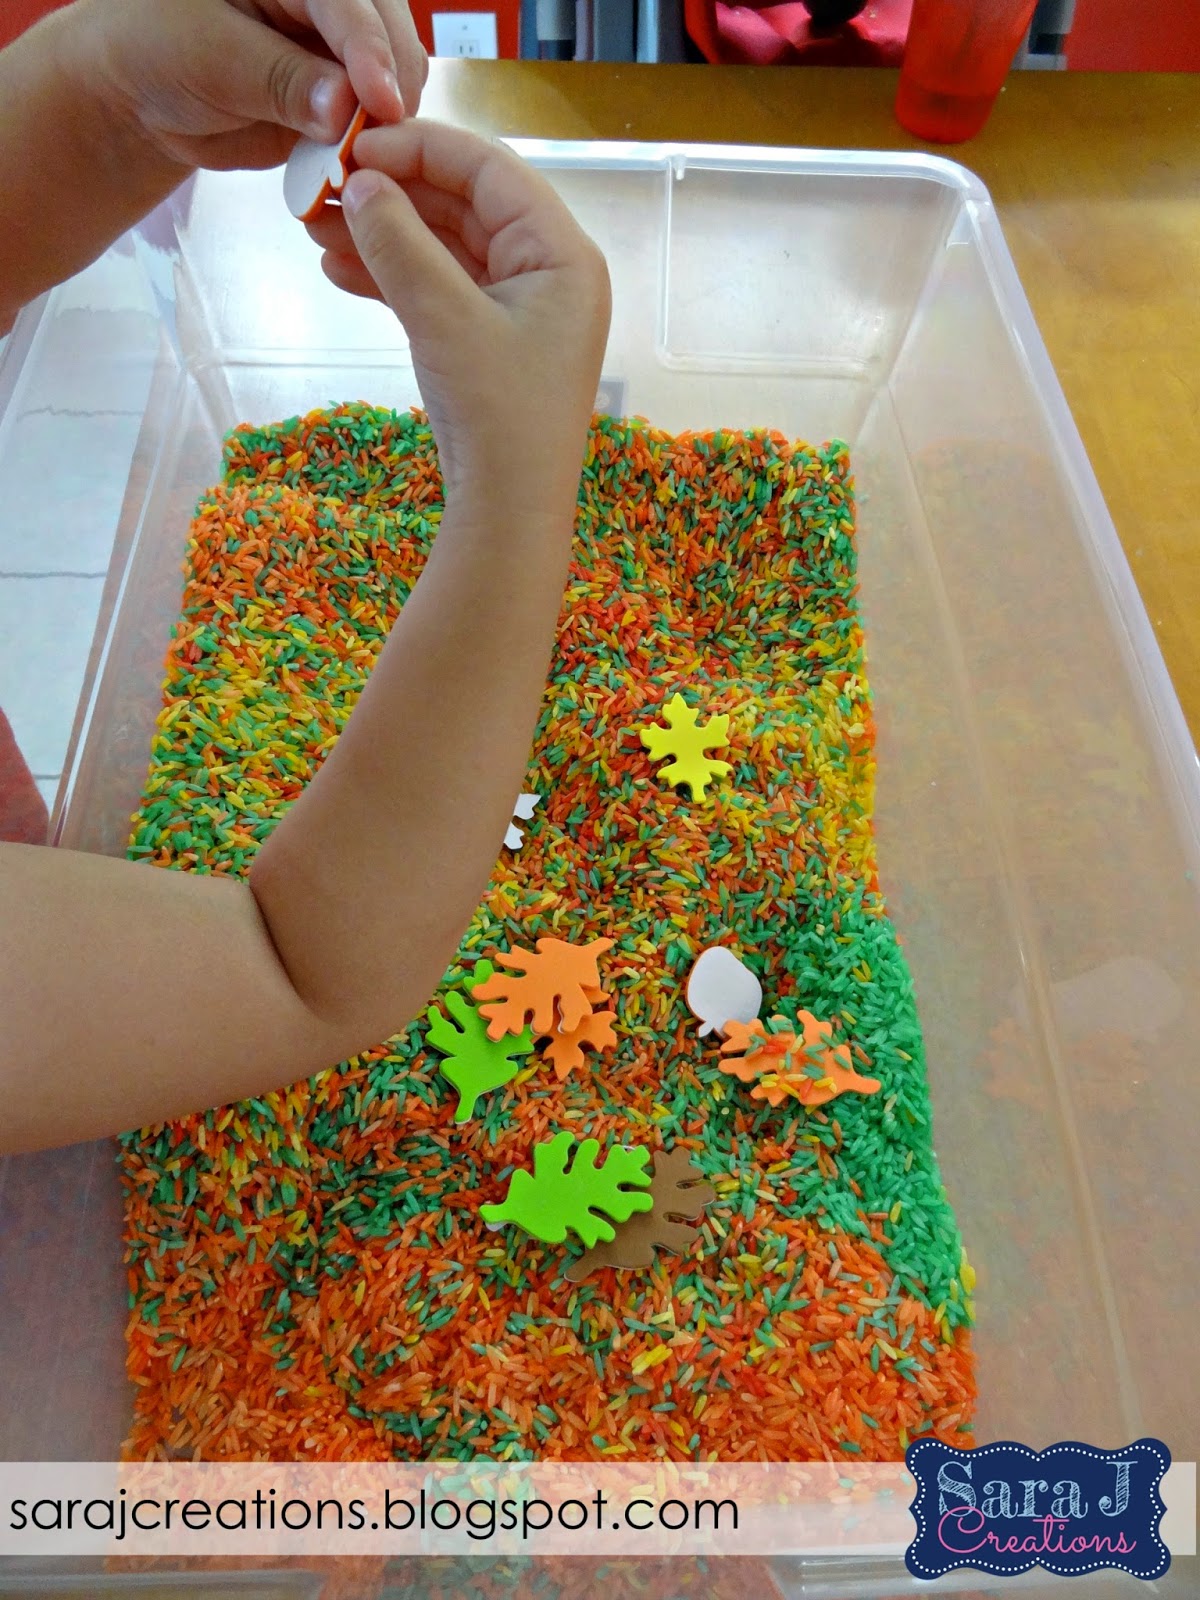 Fall sensory bin activities with free printable matching pictures card game.